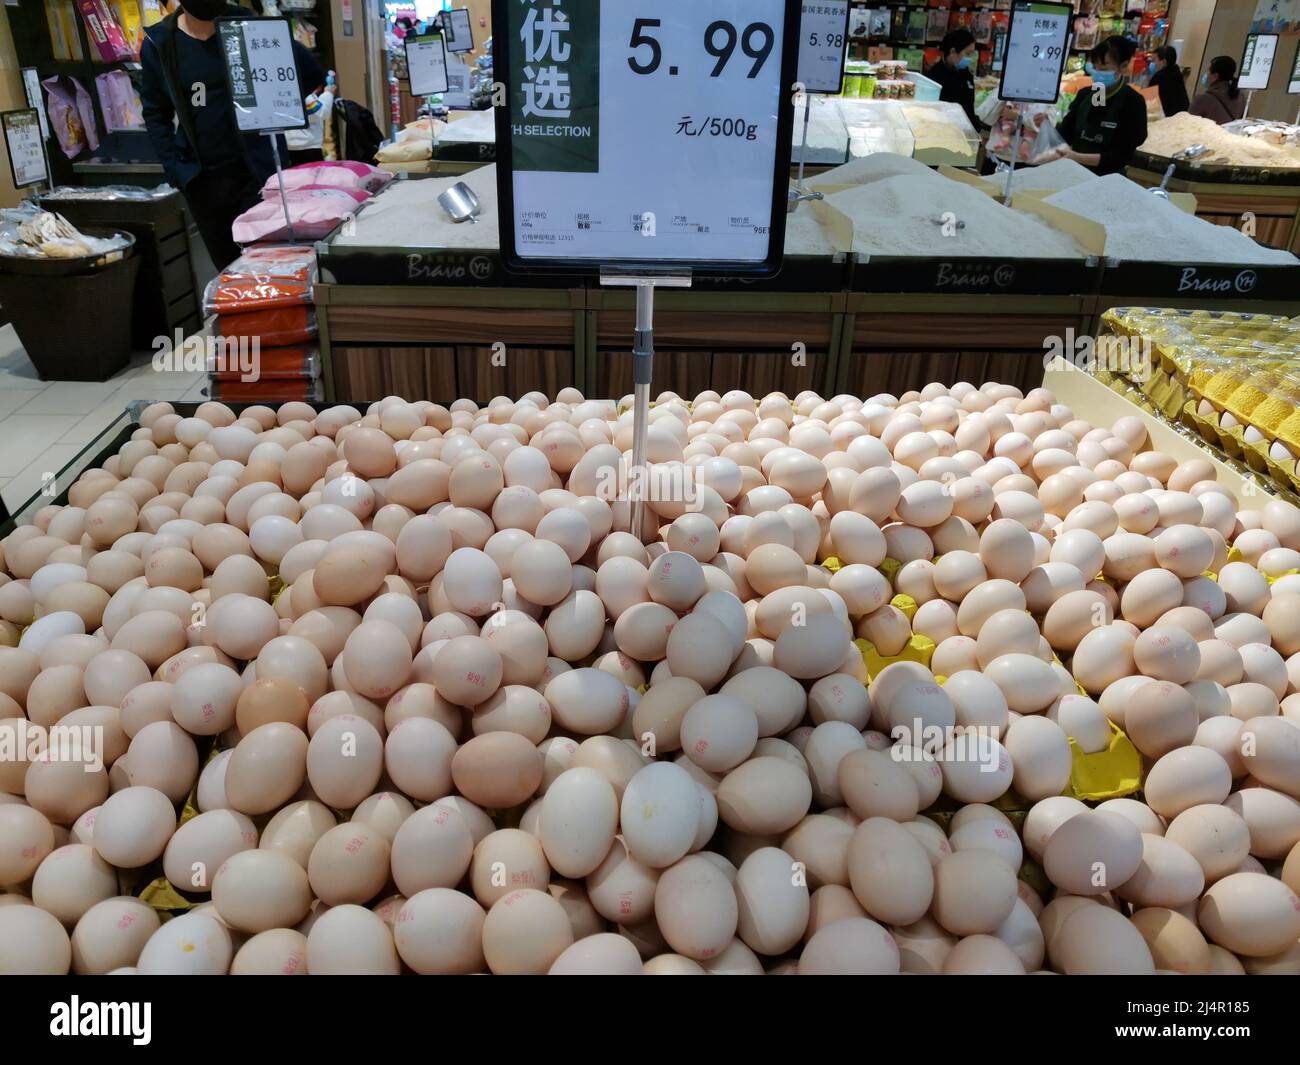 YICHANG, CHINA - APRIL 17, 2022 - Eggs on sale at a supermarket in Yichang, Hubei Province, China, April 17, 2022. Global egg prices have soared due t Stock Photo